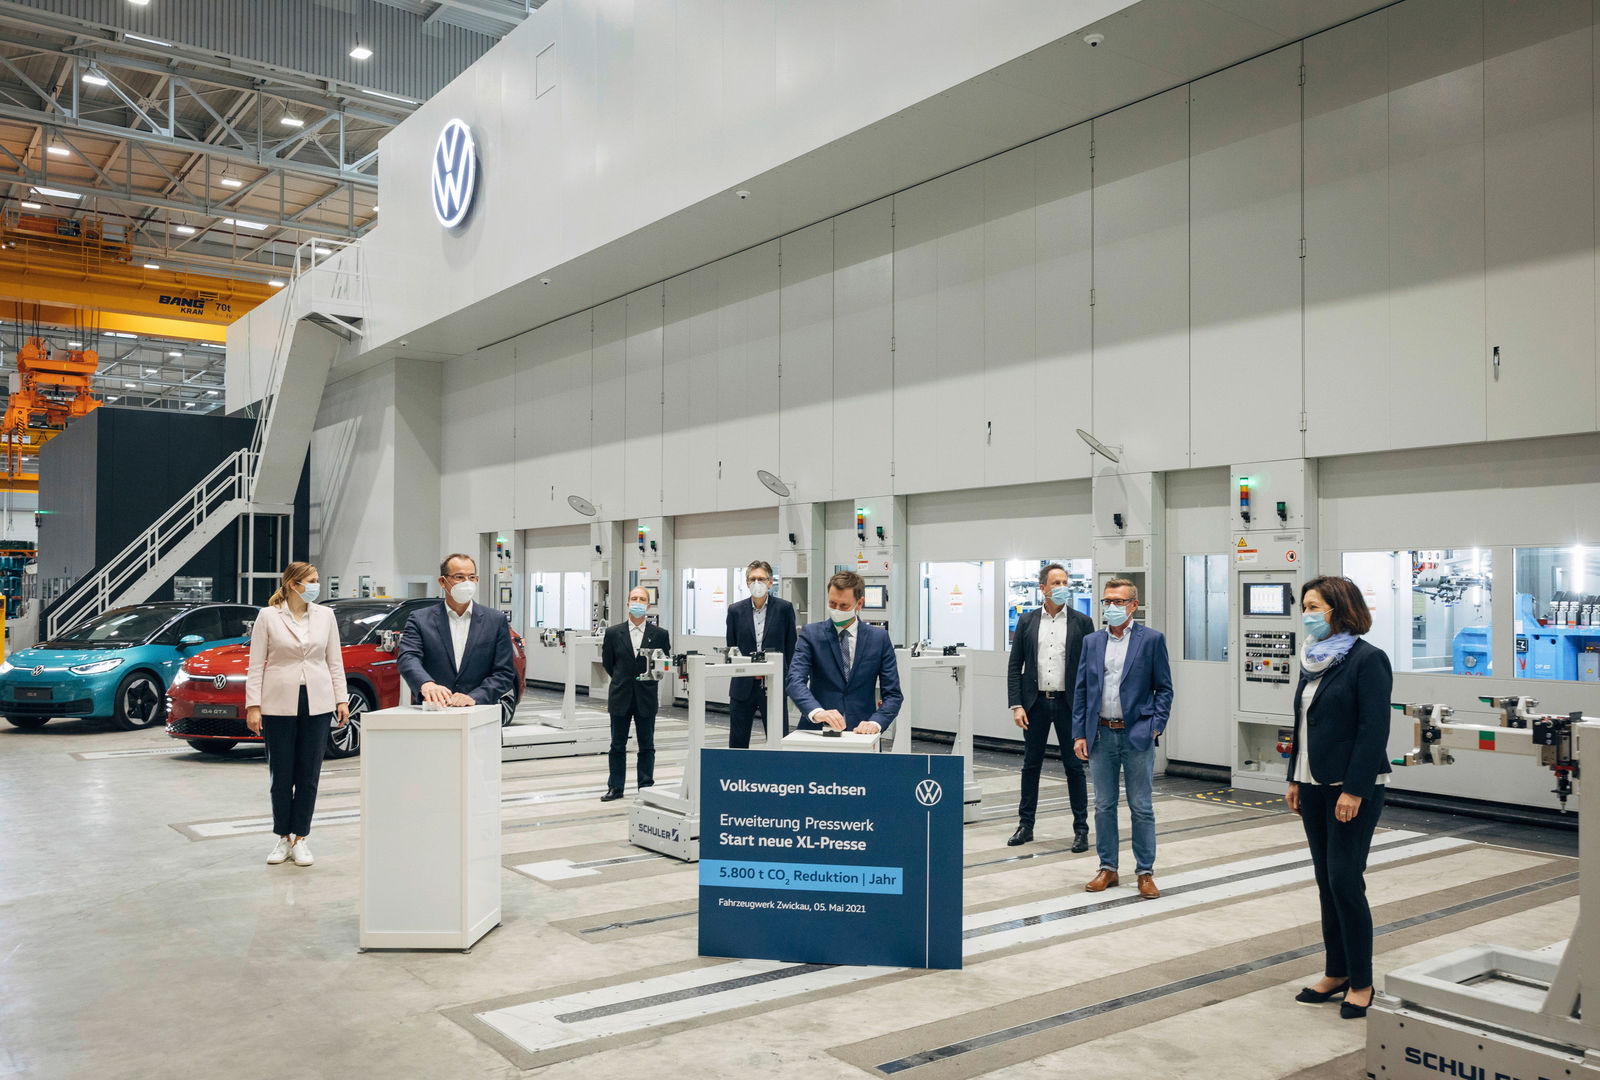 Press shop expansion: Volkswagen reduces the number of truck journeys to Zwickau e-location by 9,000